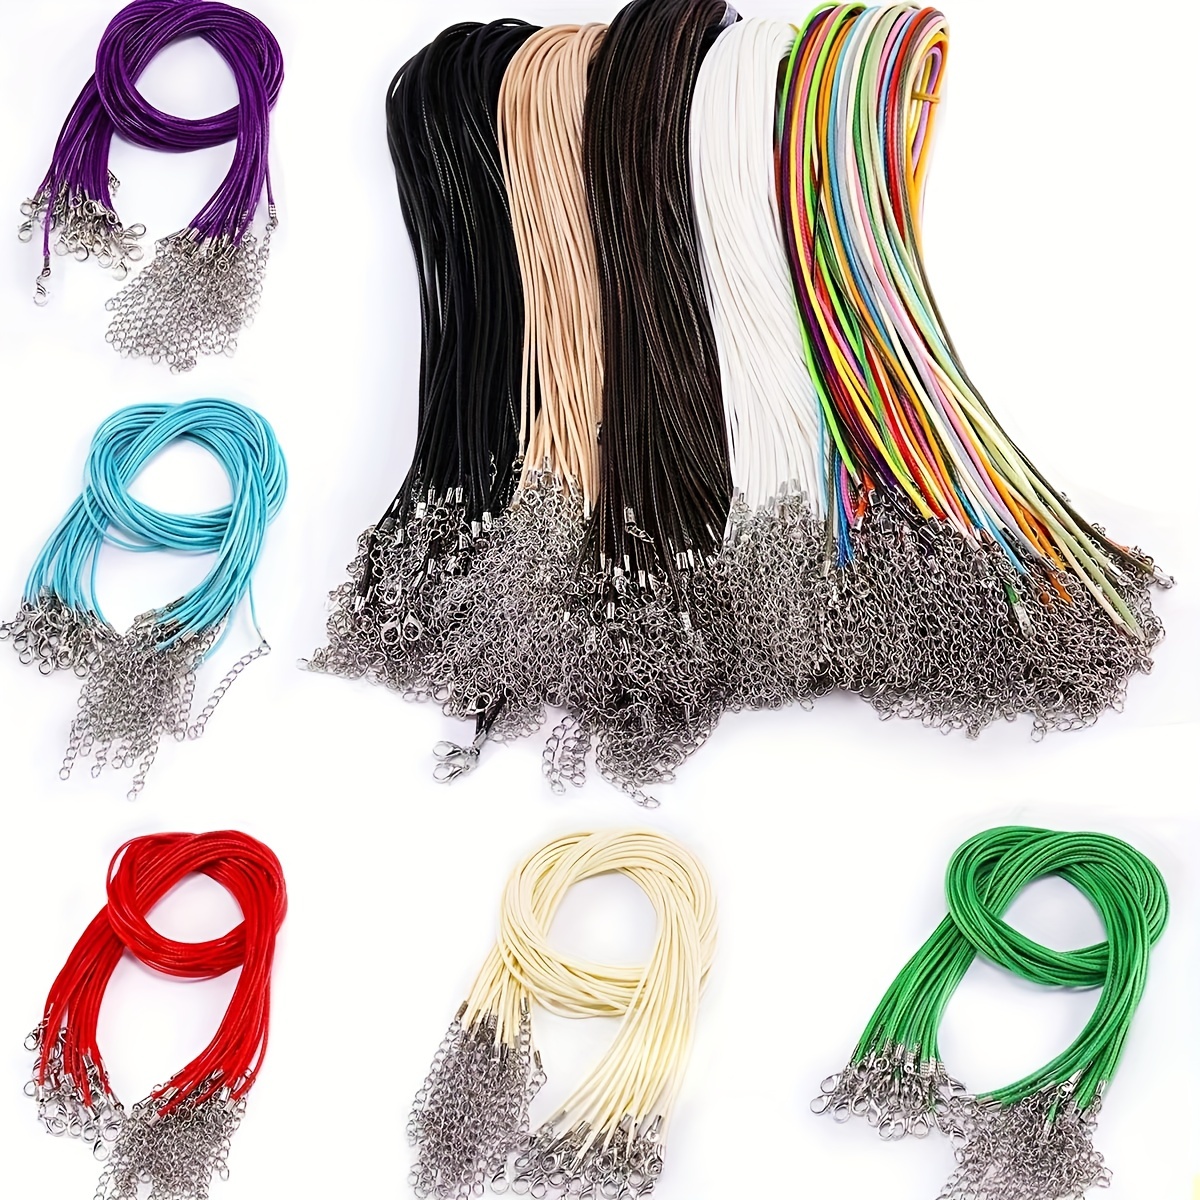 100 Pcs Necklace Cord With Clasp,waxed Necklace Cord Cotton Rope